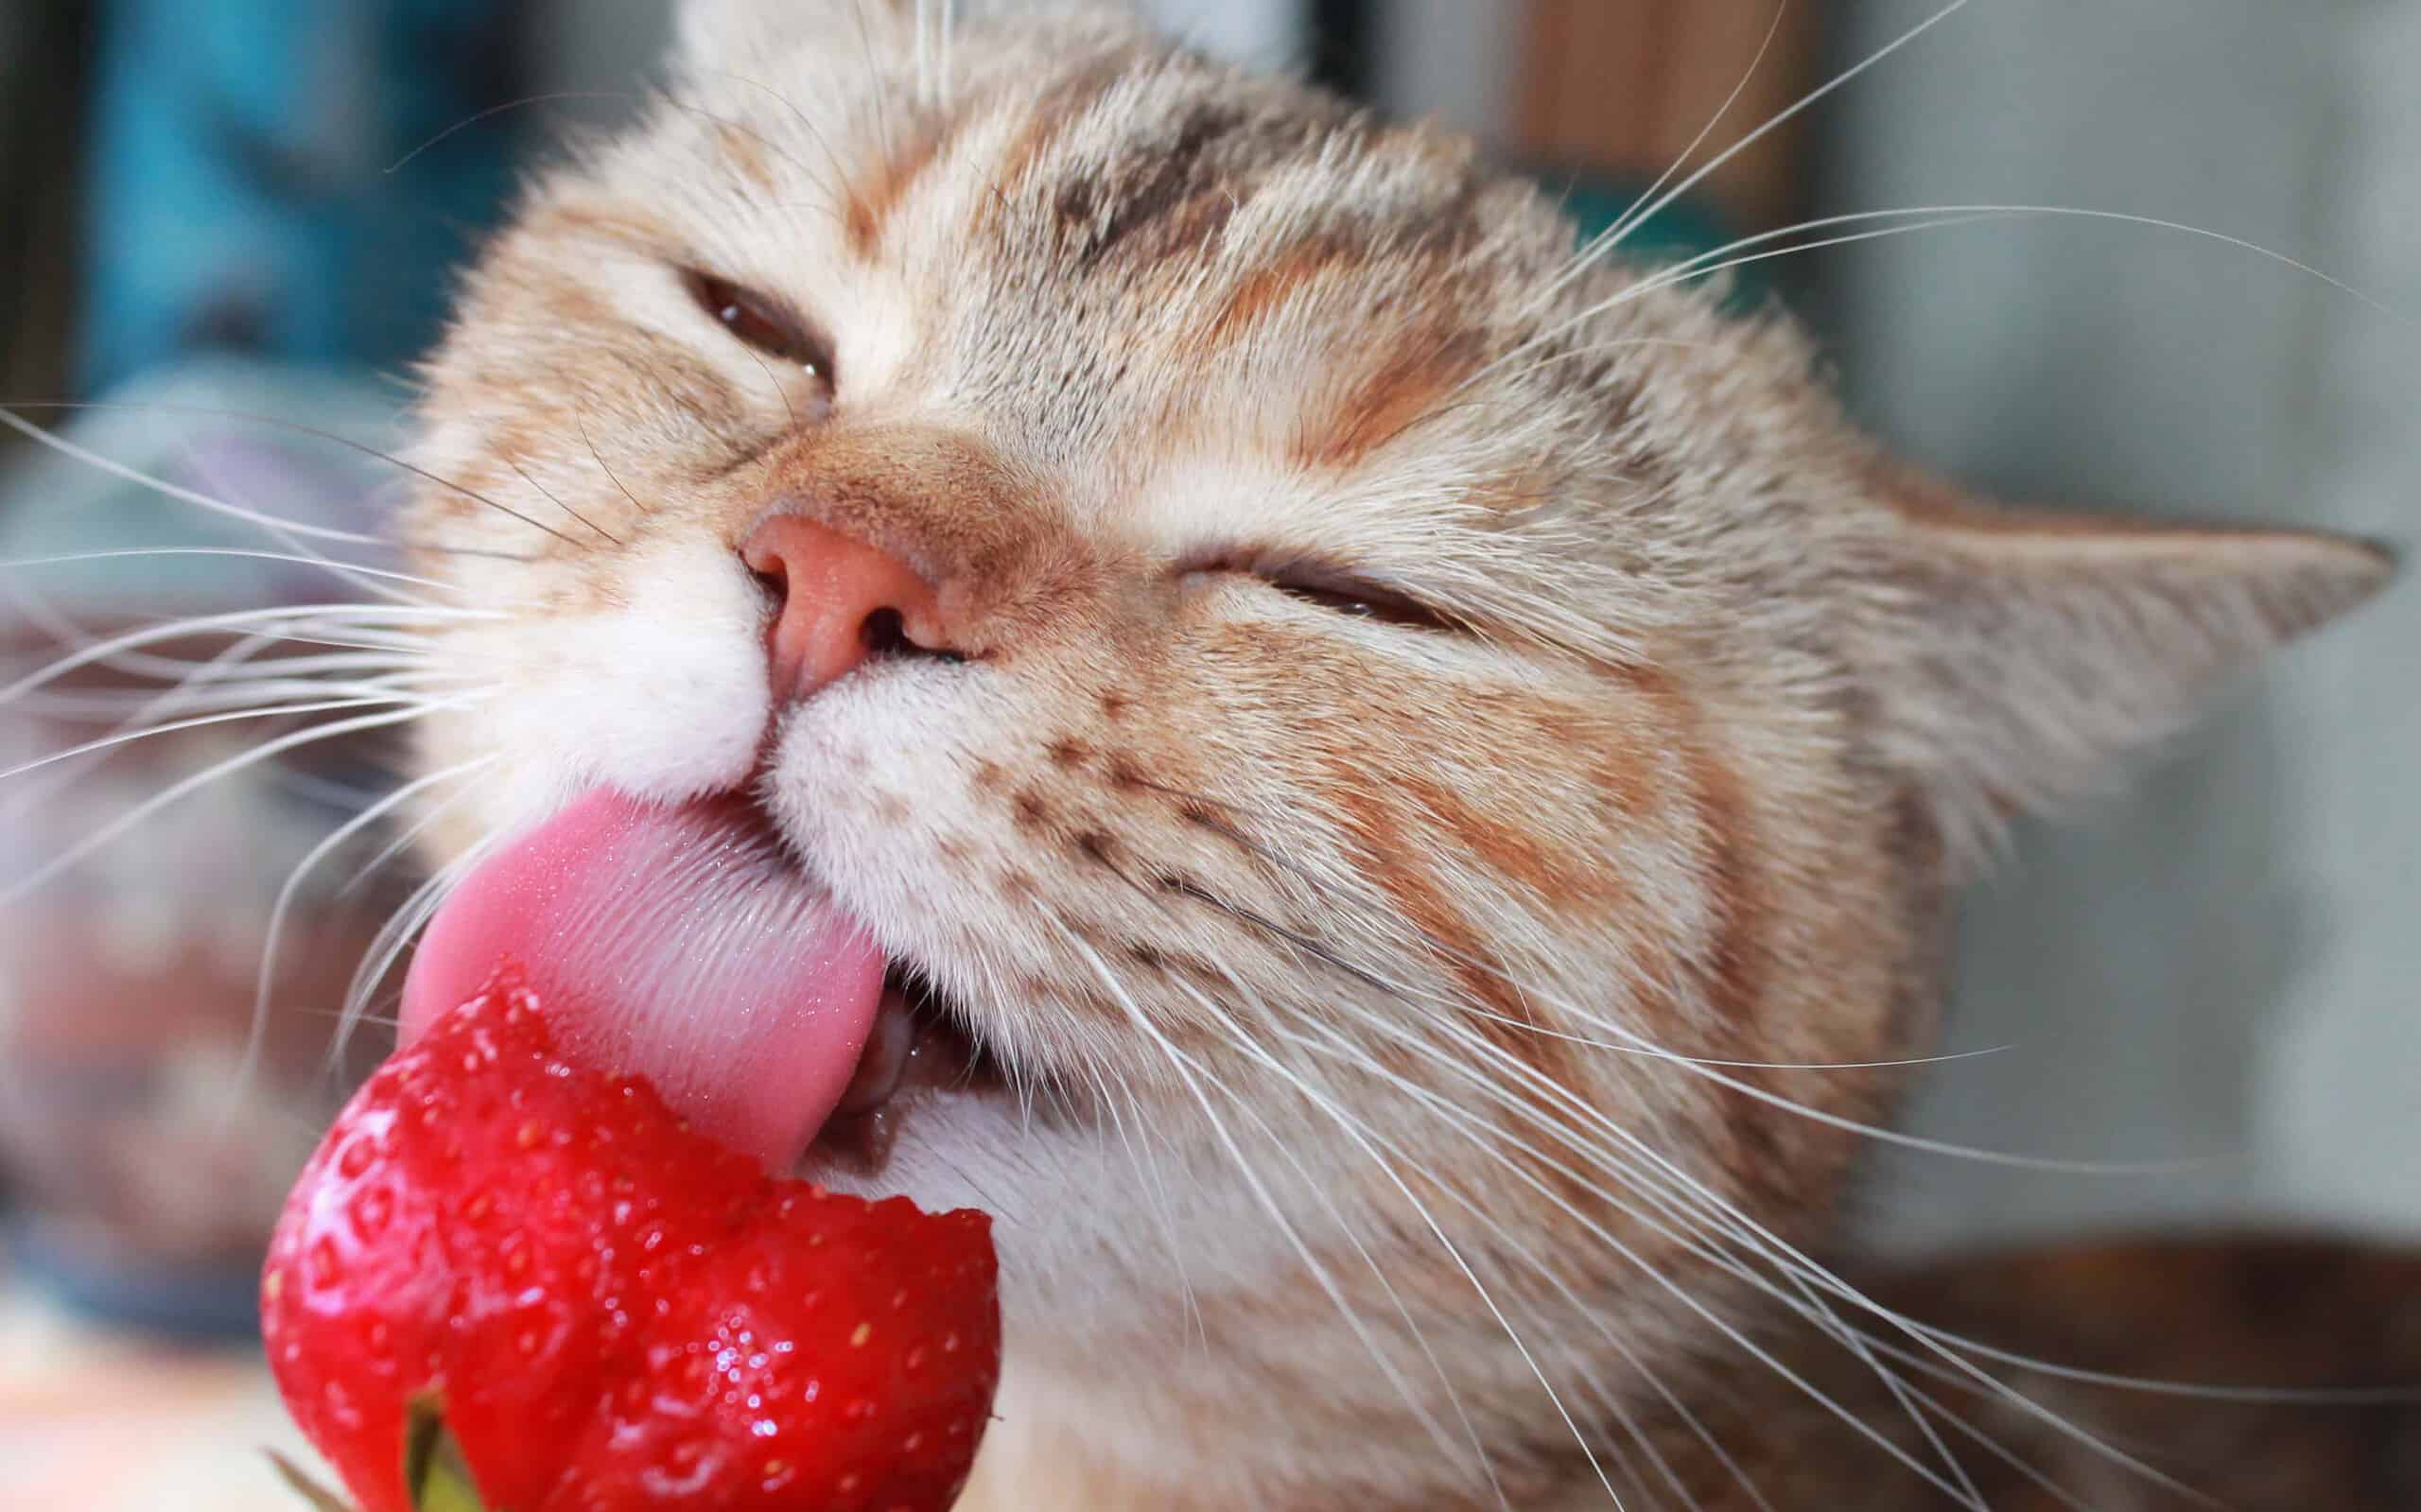 Cat eating a strawberry